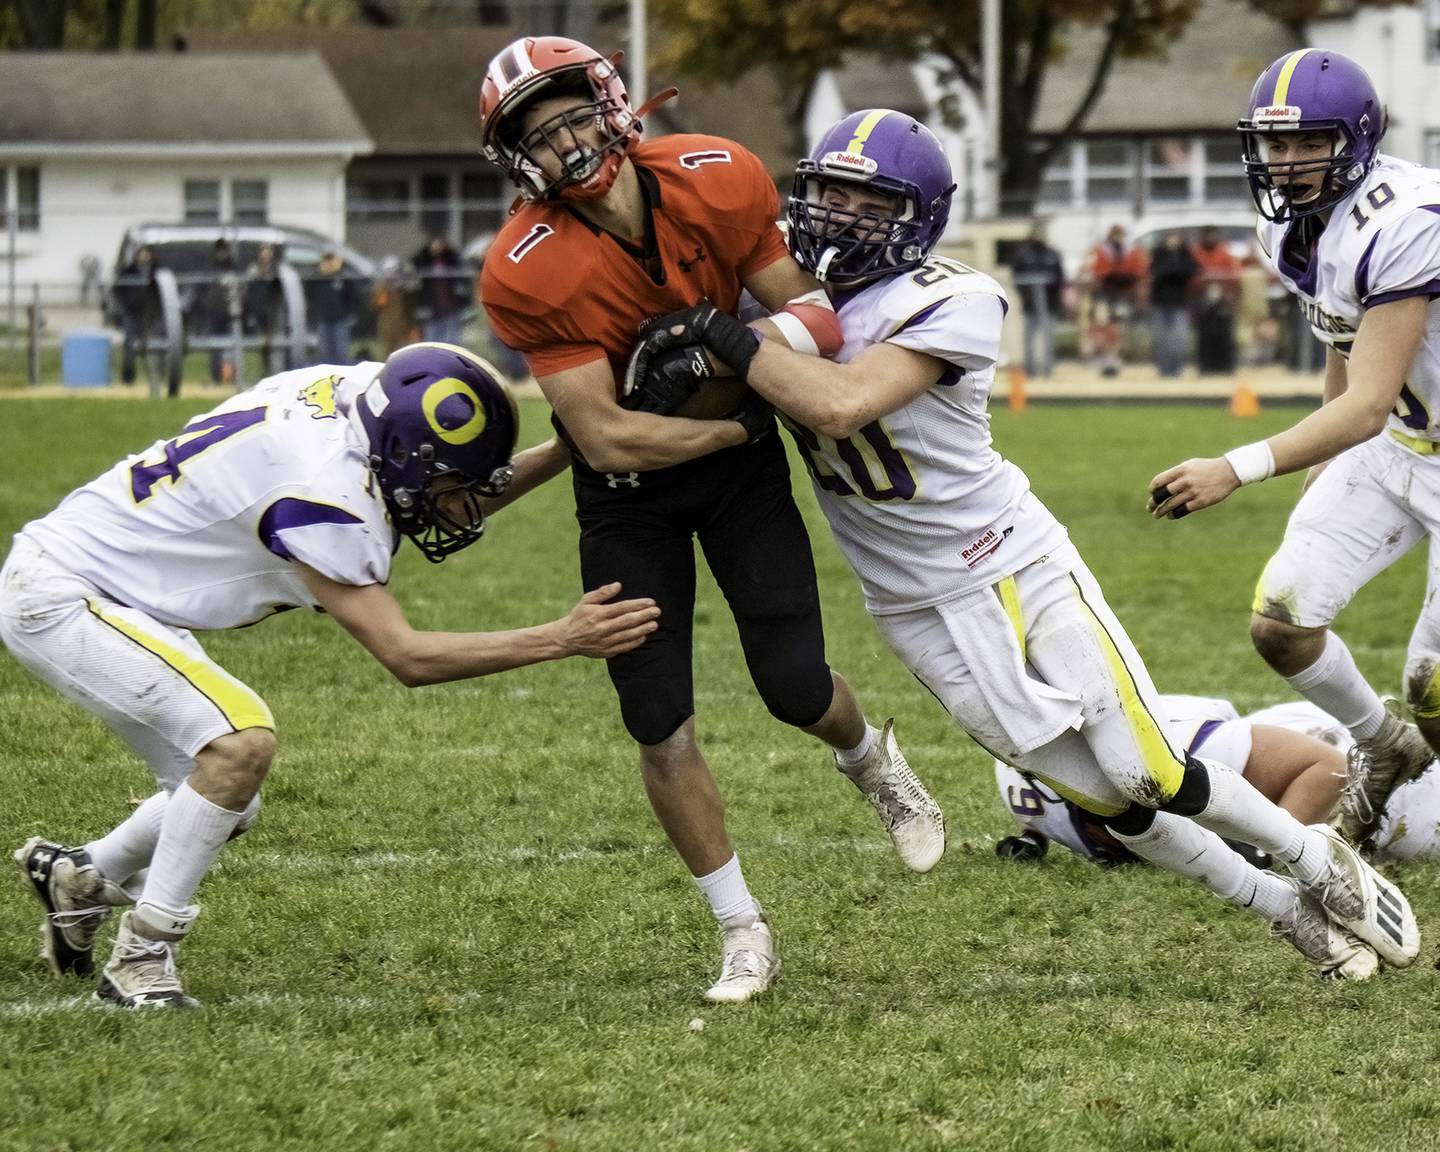 Amboy-LaMoille's Kye Koch (1) hangs on to the ball as Orangeville's Gunar Lobdell (20) tris to strip it during their 8-man semifinal playoff game Saturday, Nov. 13, 2021 at The Harbor in Amboy.